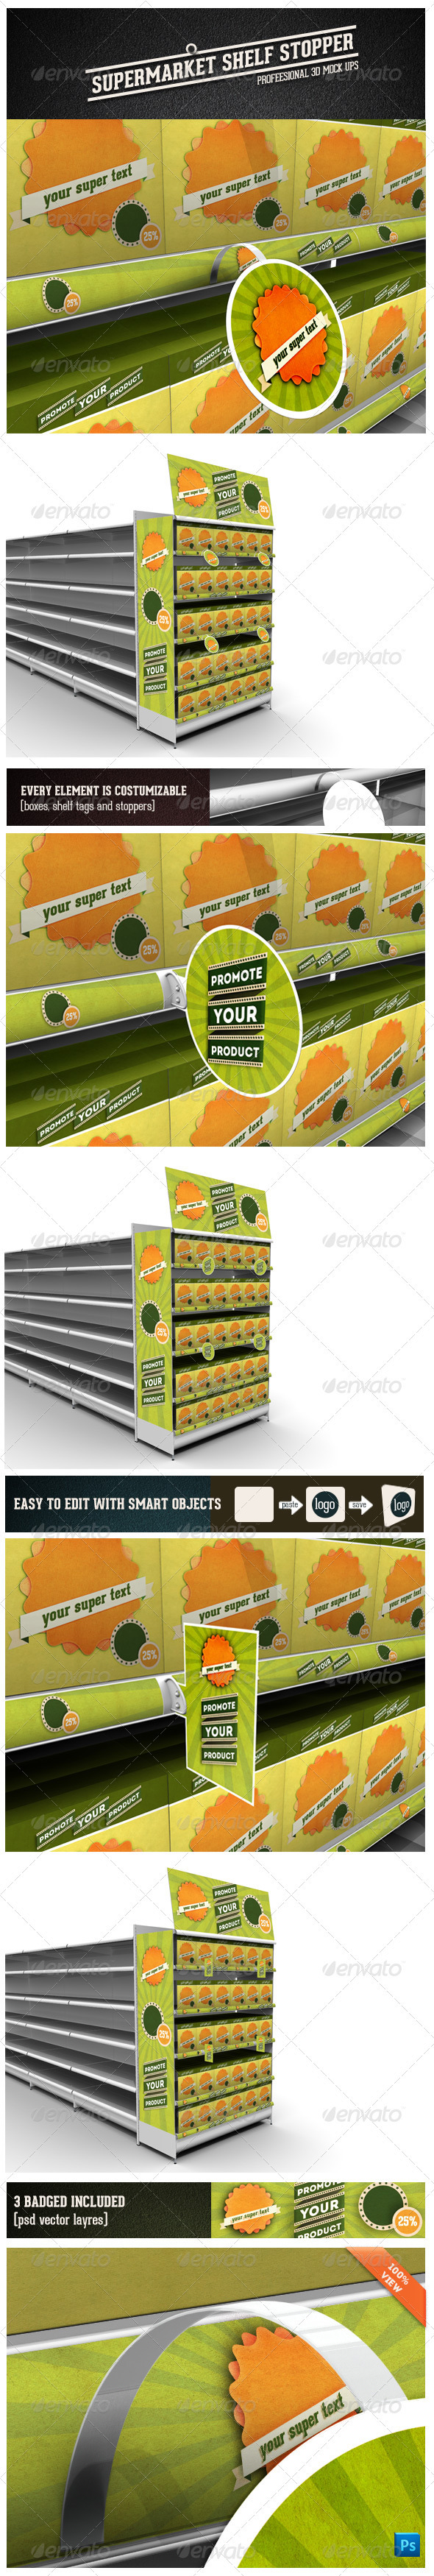 Download In Store Stopper by Patiom | GraphicRiver